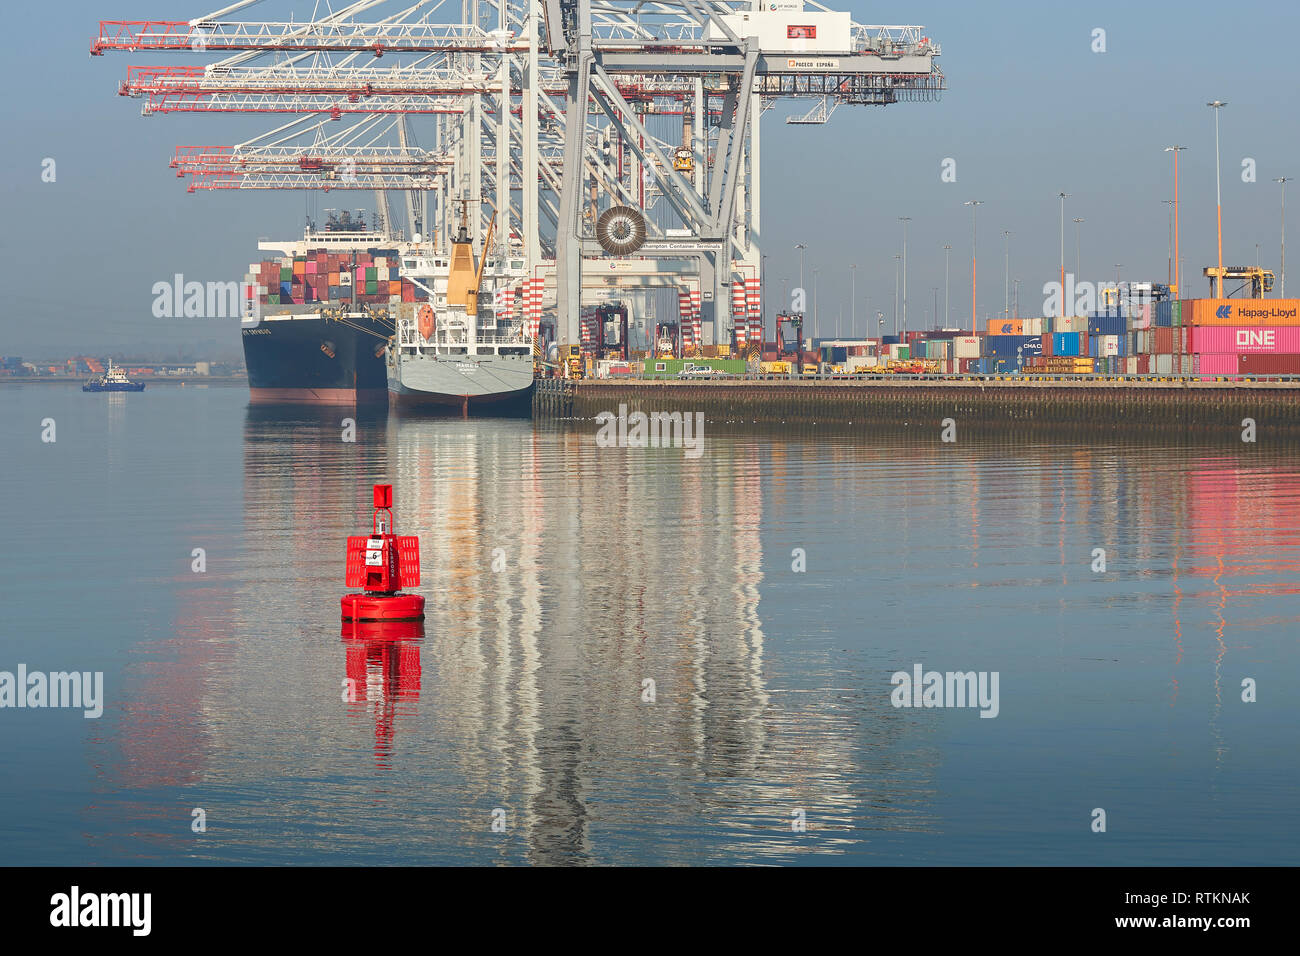 Reflections In The Water As The Small Container Ship, MAIKE D, Front, And The Larger Container Ship, NRK ORPHEUS, Behind, Are Loaded And Unloaded. UK. Stock Photo